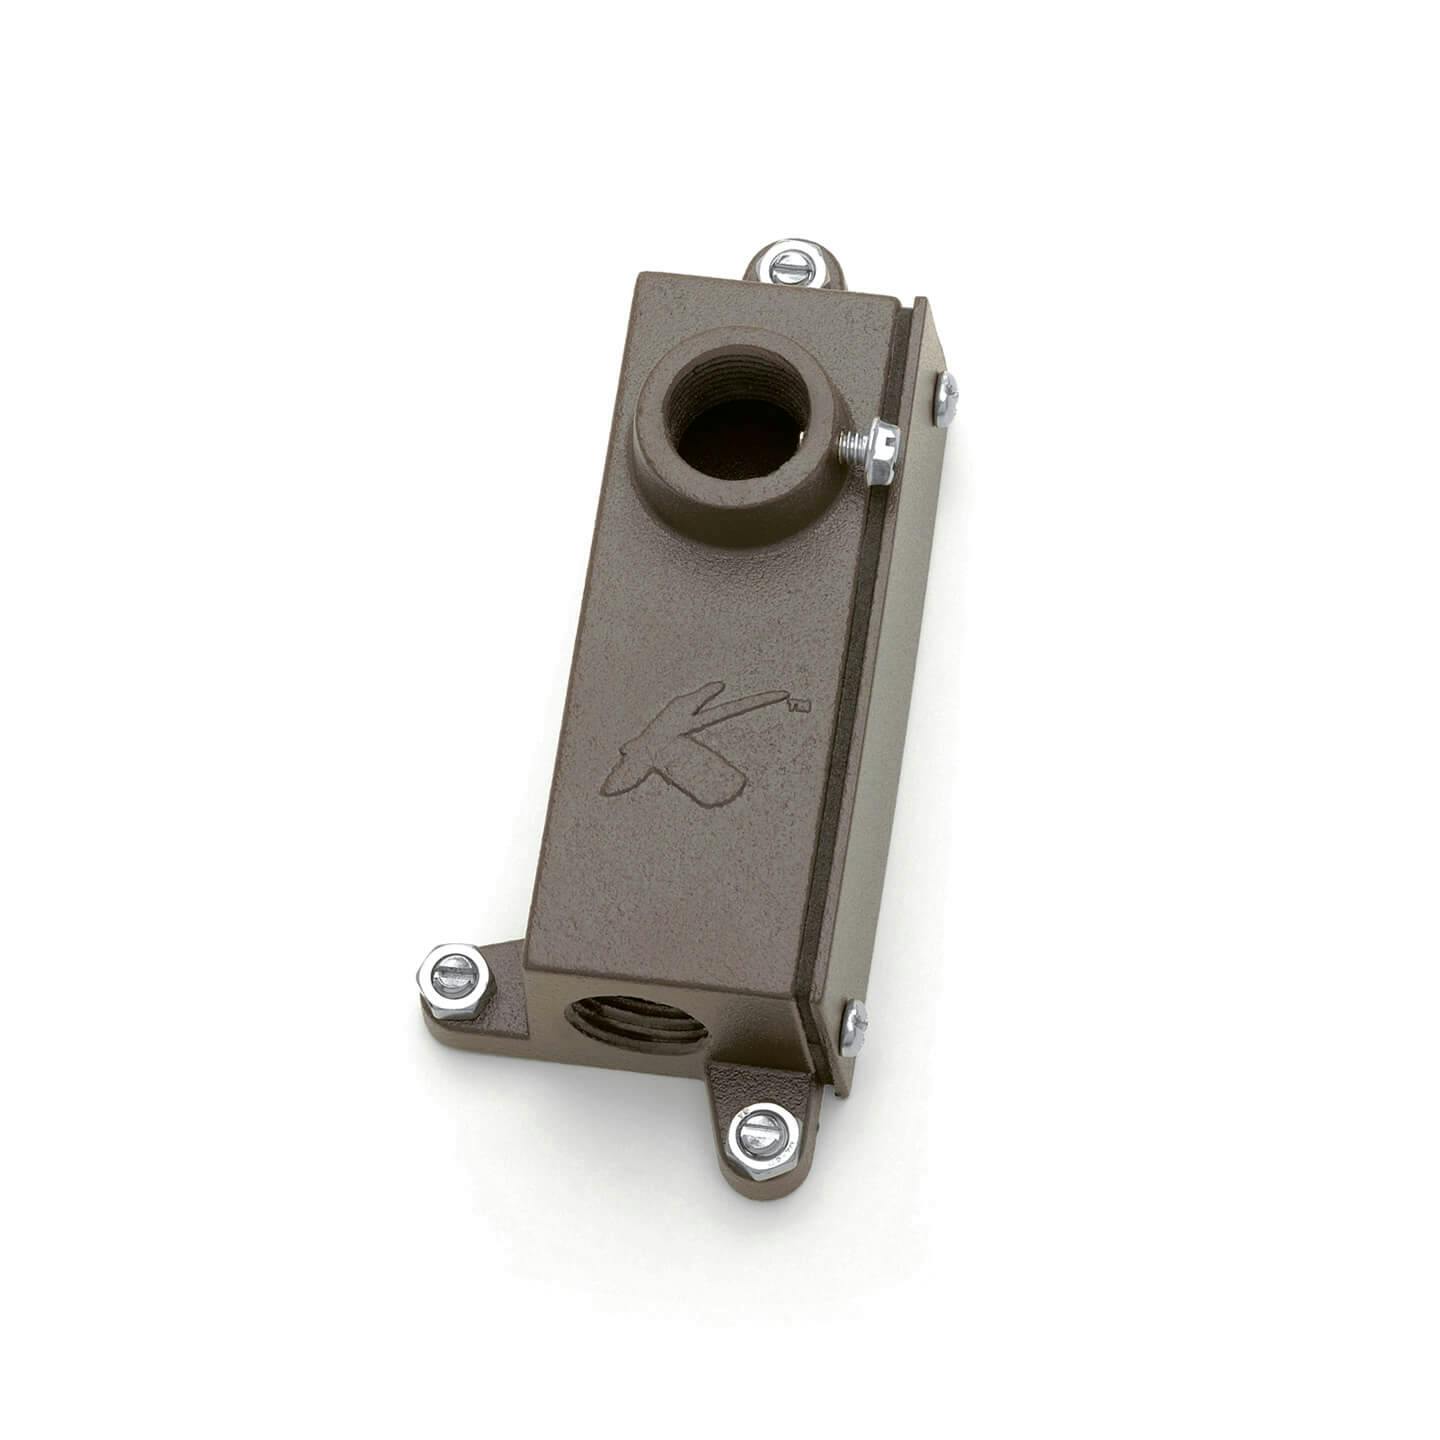 Product image of a junction box mounting bracket in black finish